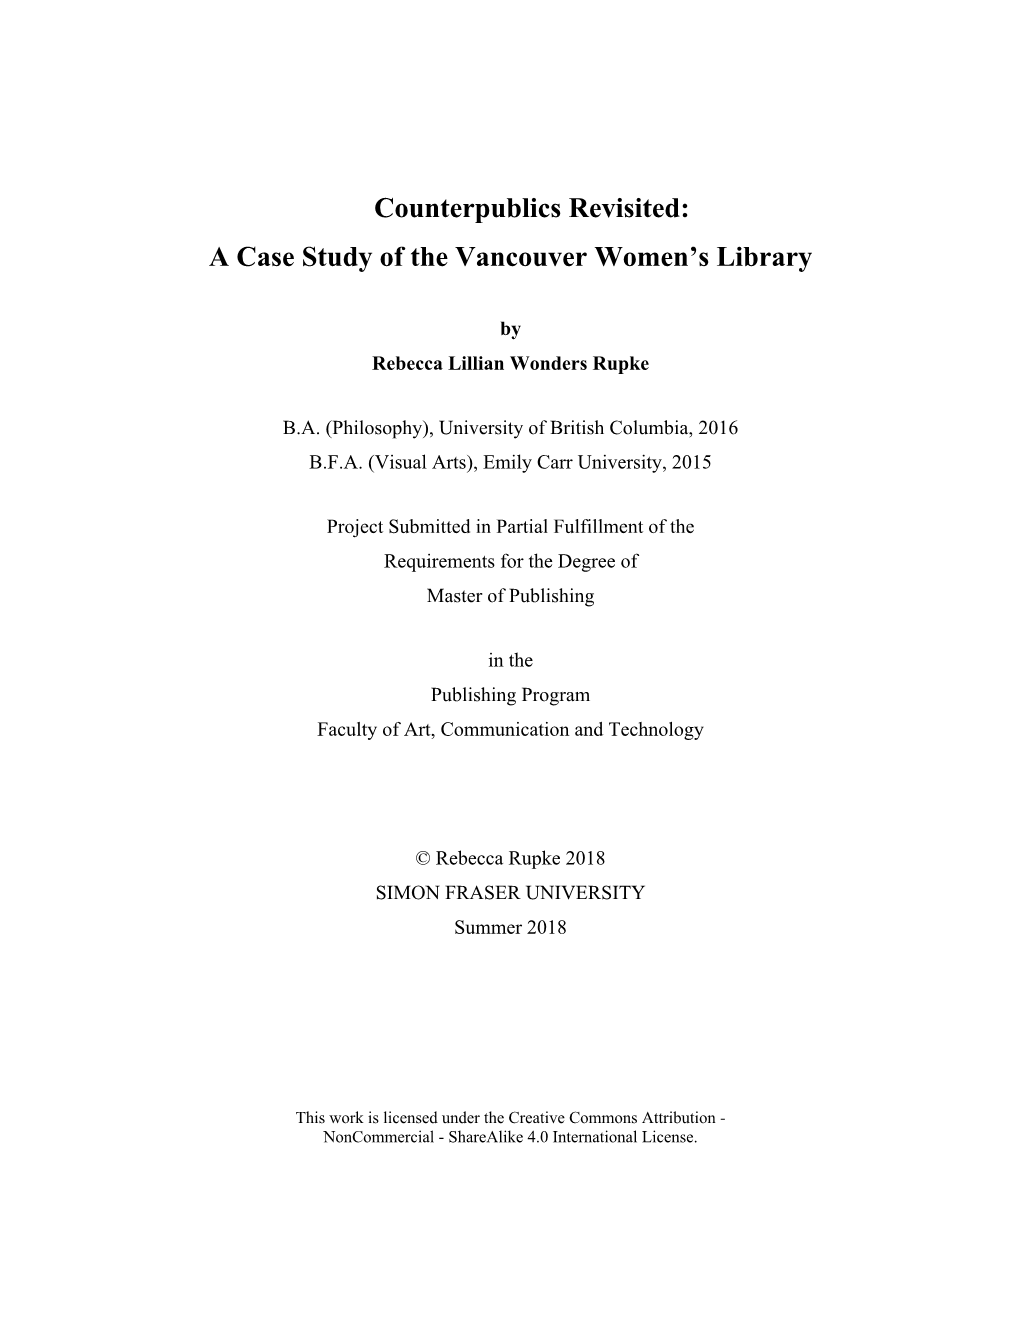 Counterpublics Revisited: a Case Study of the Vancouver Women's